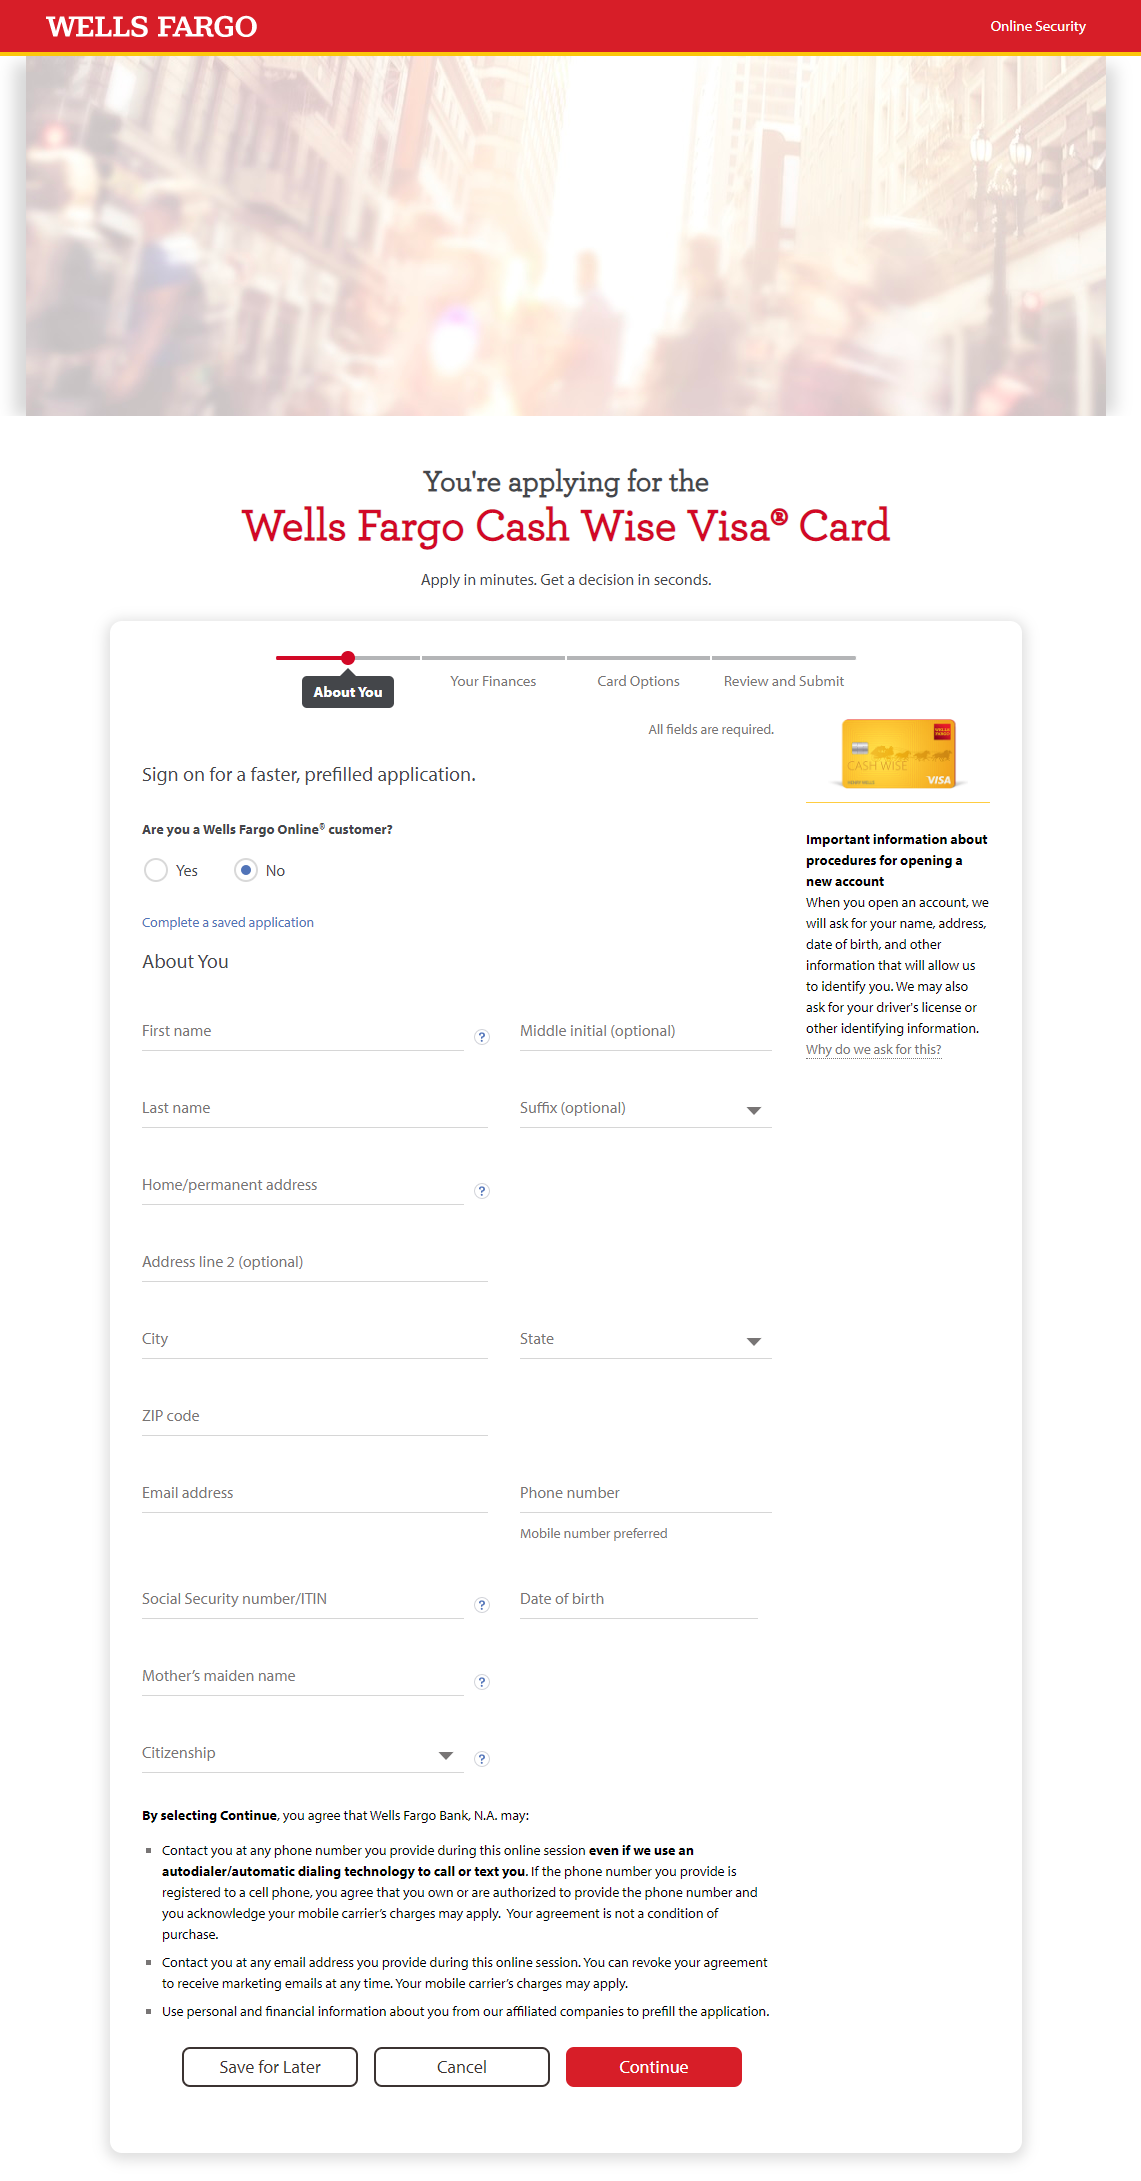 apply for a Wells Fargo Cash Wise Visa credit card